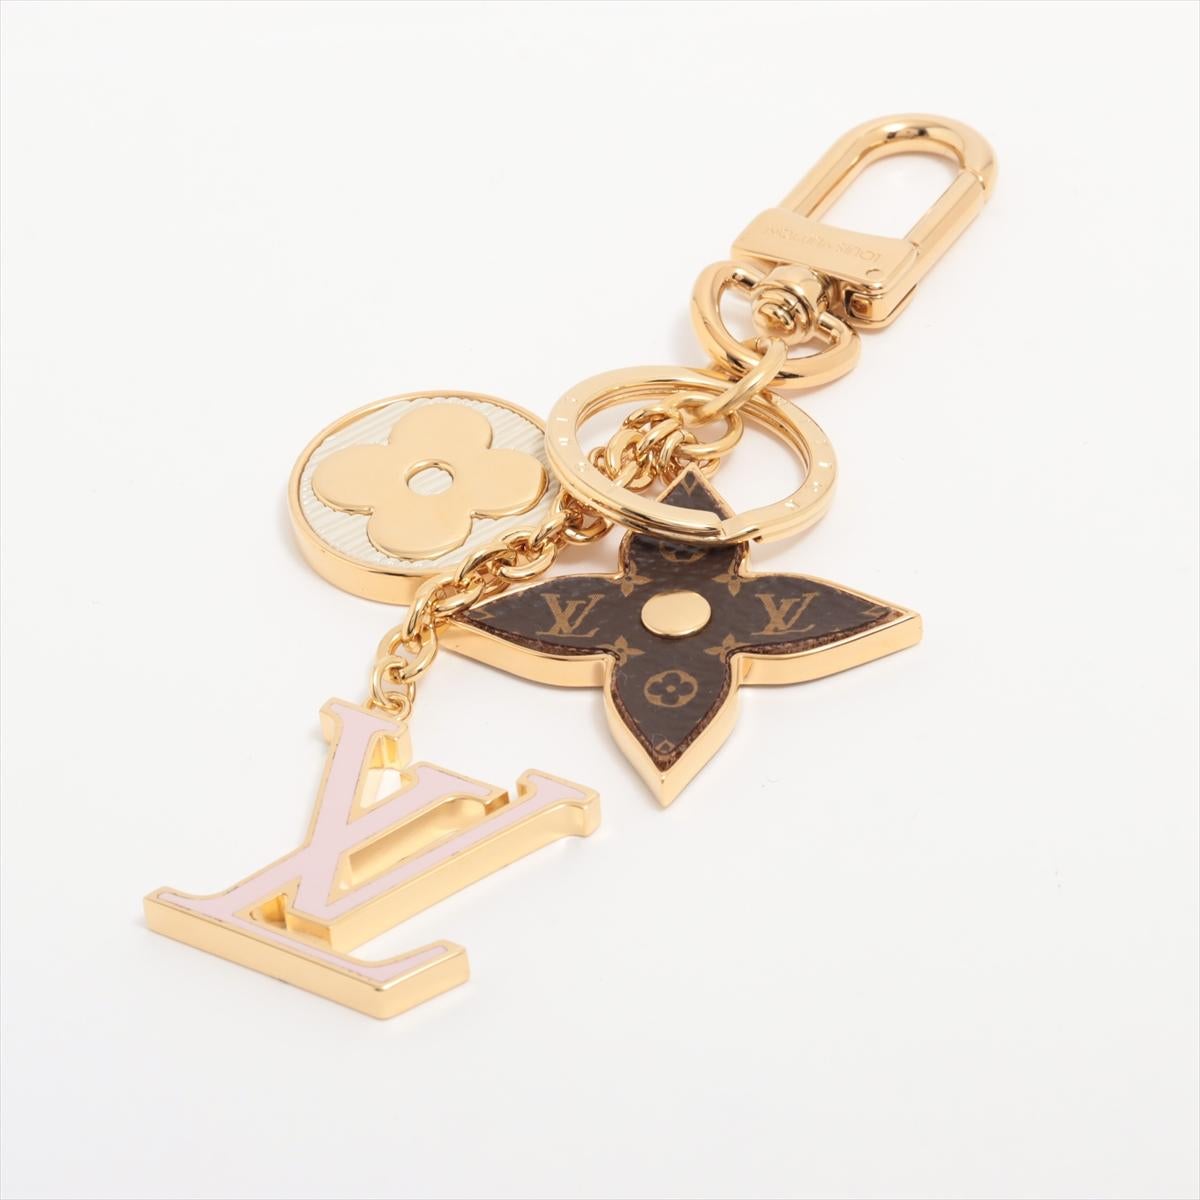 The Louis Vuitton Spring Street Bag Charm is a captivating and stylish accessory that adds a touch of elegance to your bags.  The charm features LV initials at its center, intricately designed with the brand's iconic monogram canvas. Surrounding the